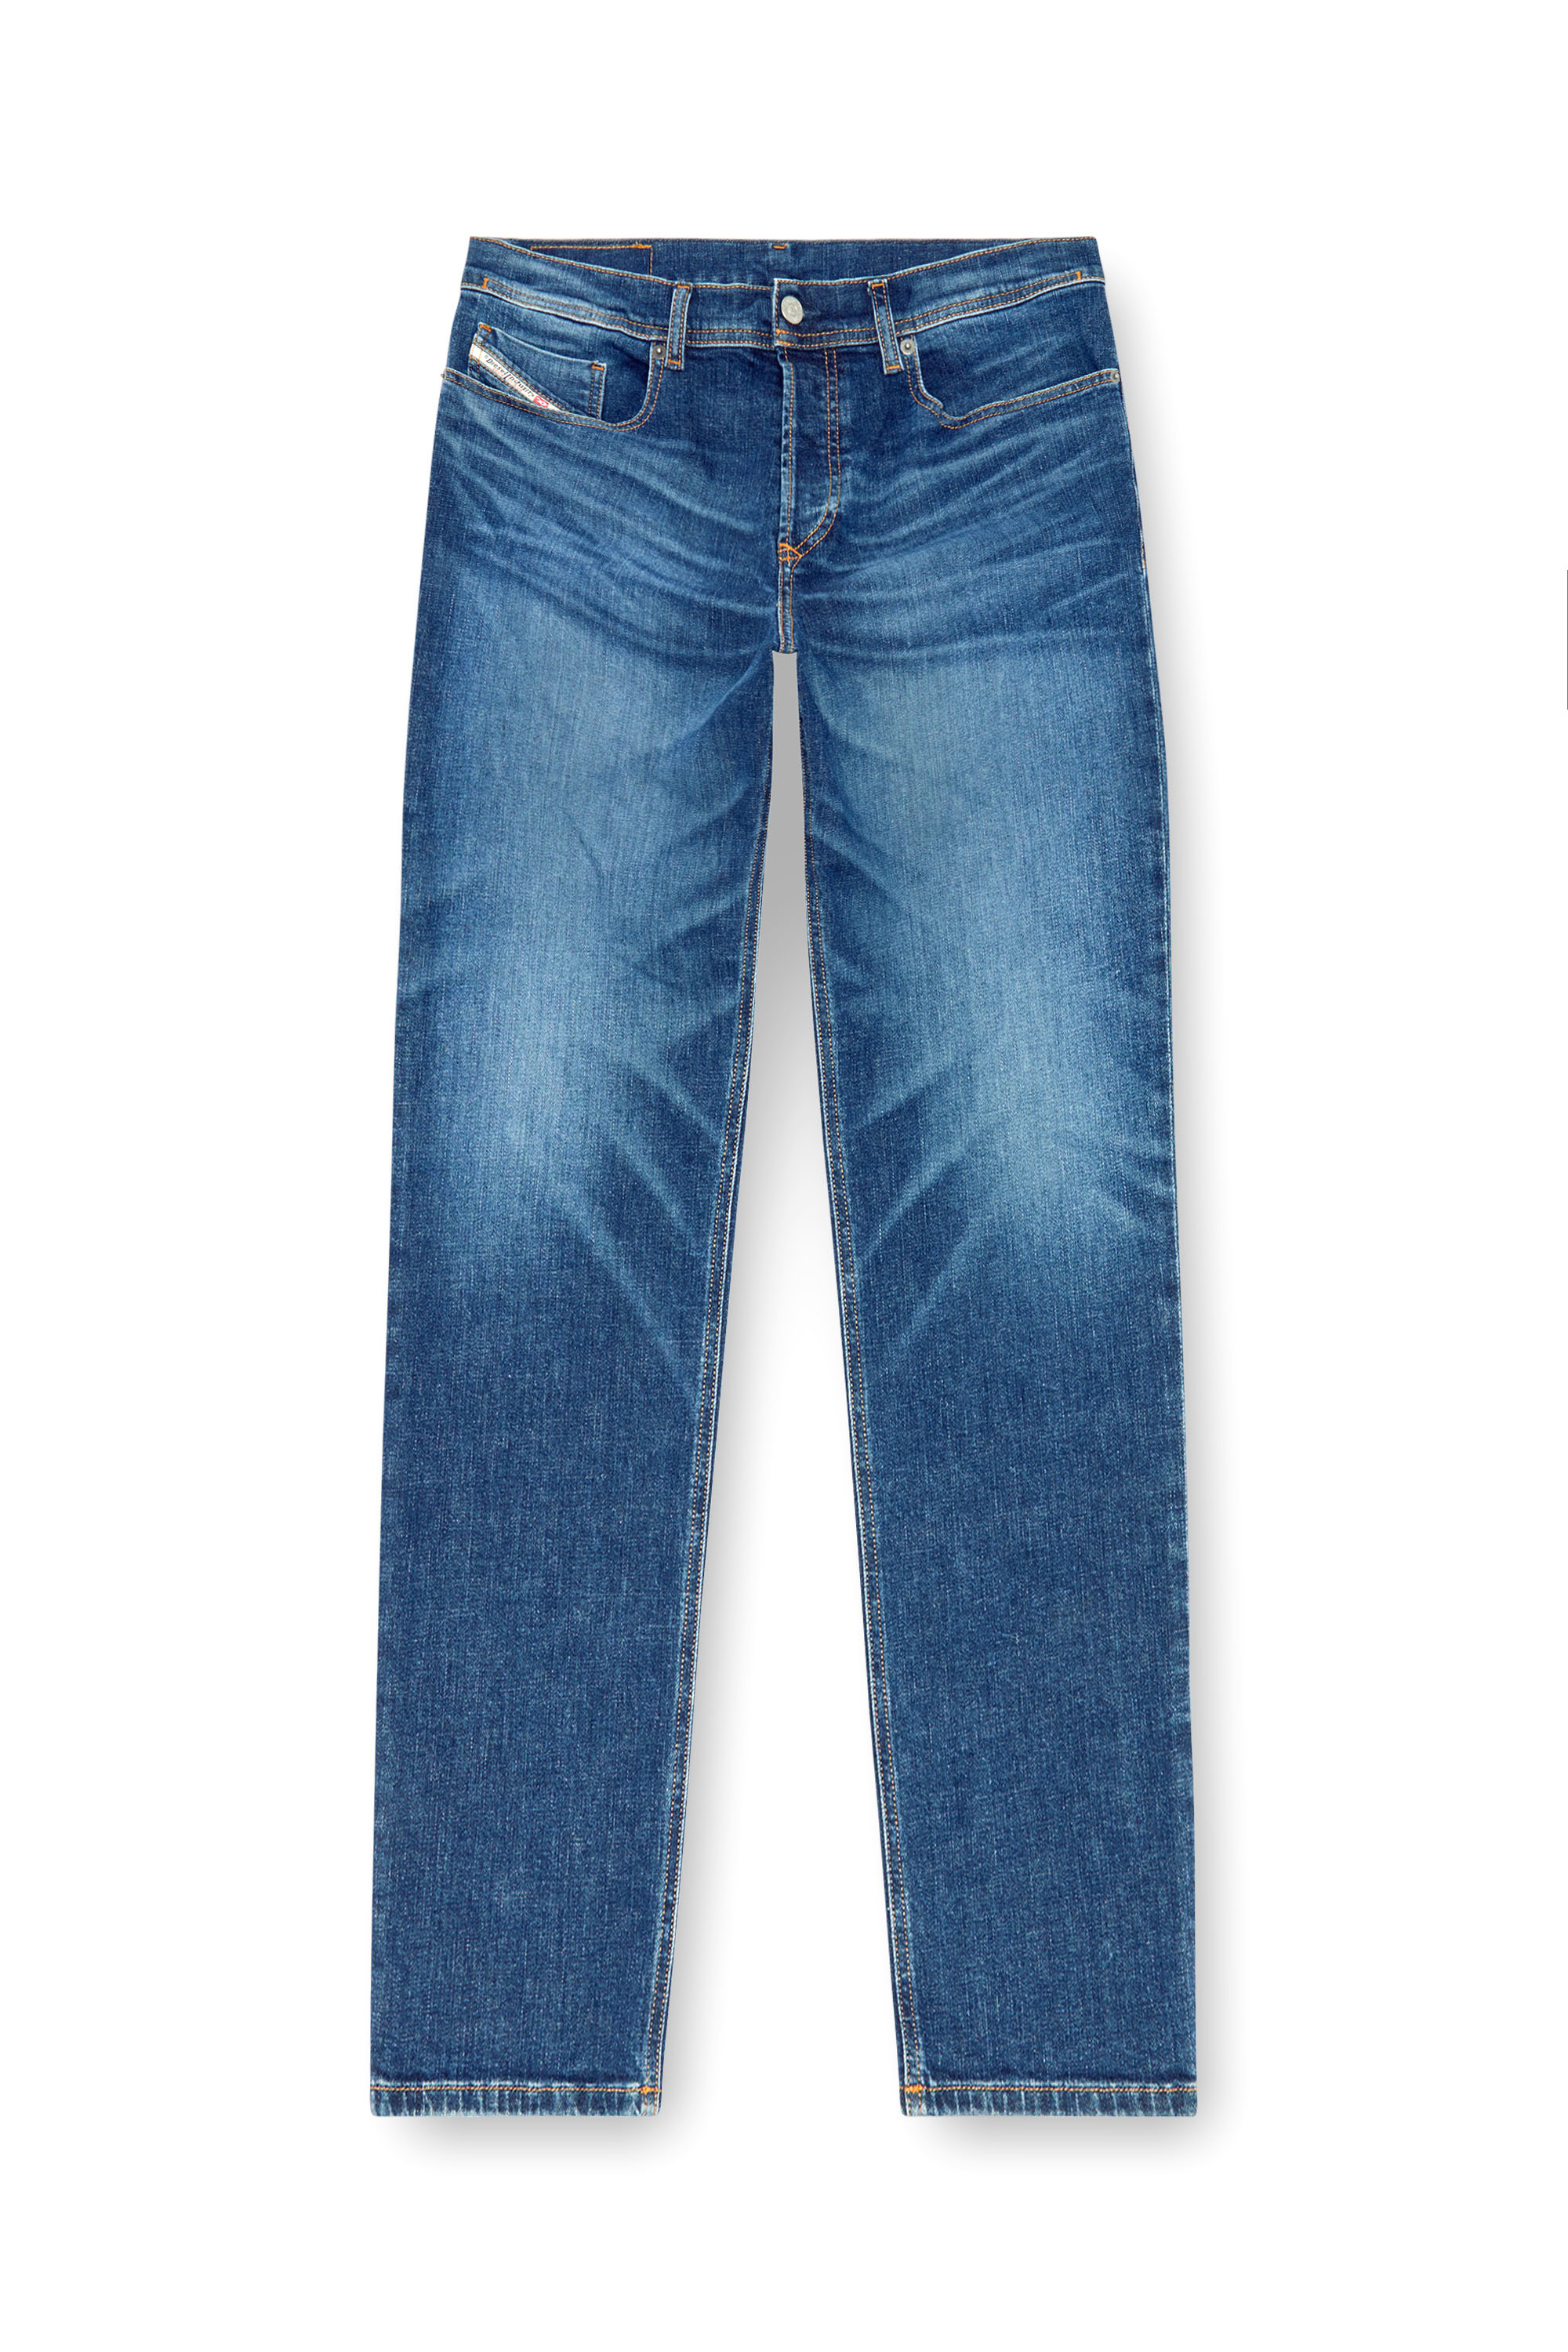 Diesel - Tapered Jeans 2023 D-Finitive 09J47, Hombre Tapered Jeans - 2023 D-Finitive in Azul marino - Image 5